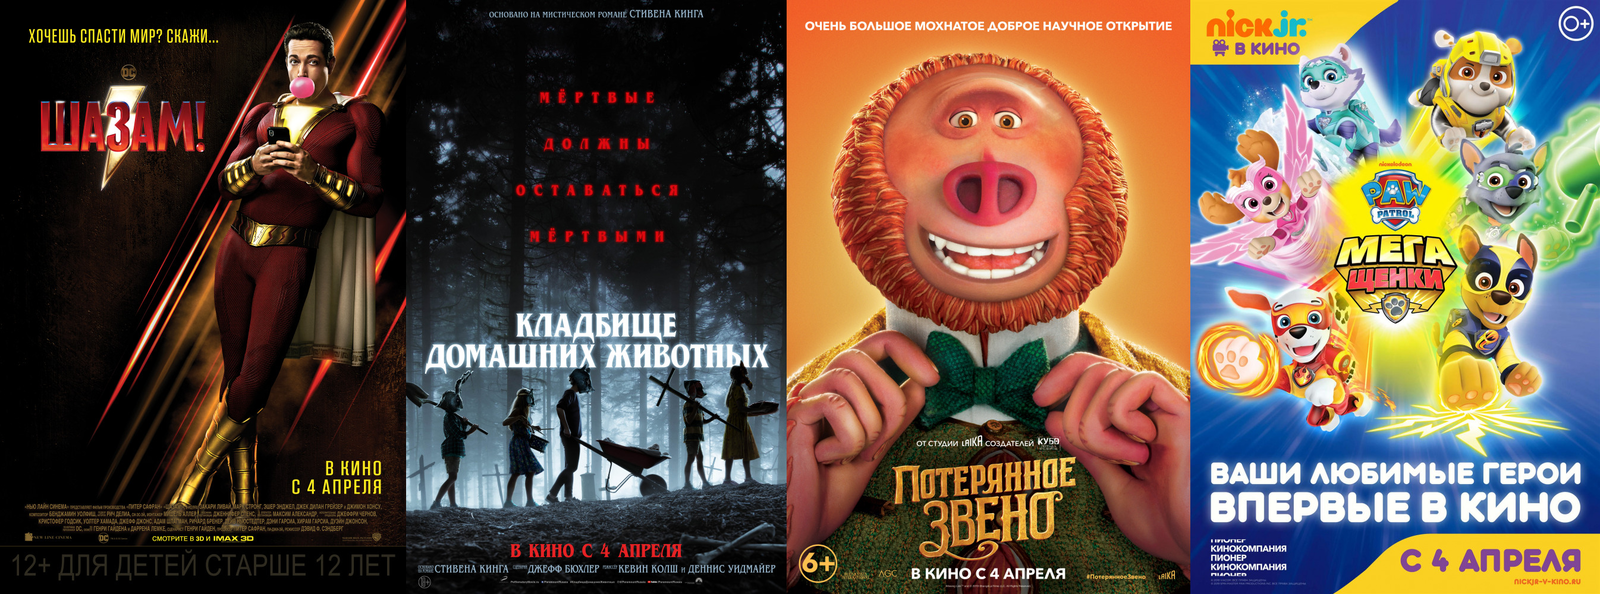 Russian box office receipts and distribution of screenings over the past weekend (April 4 - 7) - Movies, Box office fees, Film distribution, Shazam, Pet cemetery, The Lost Link, Stephen King Pet Sematary